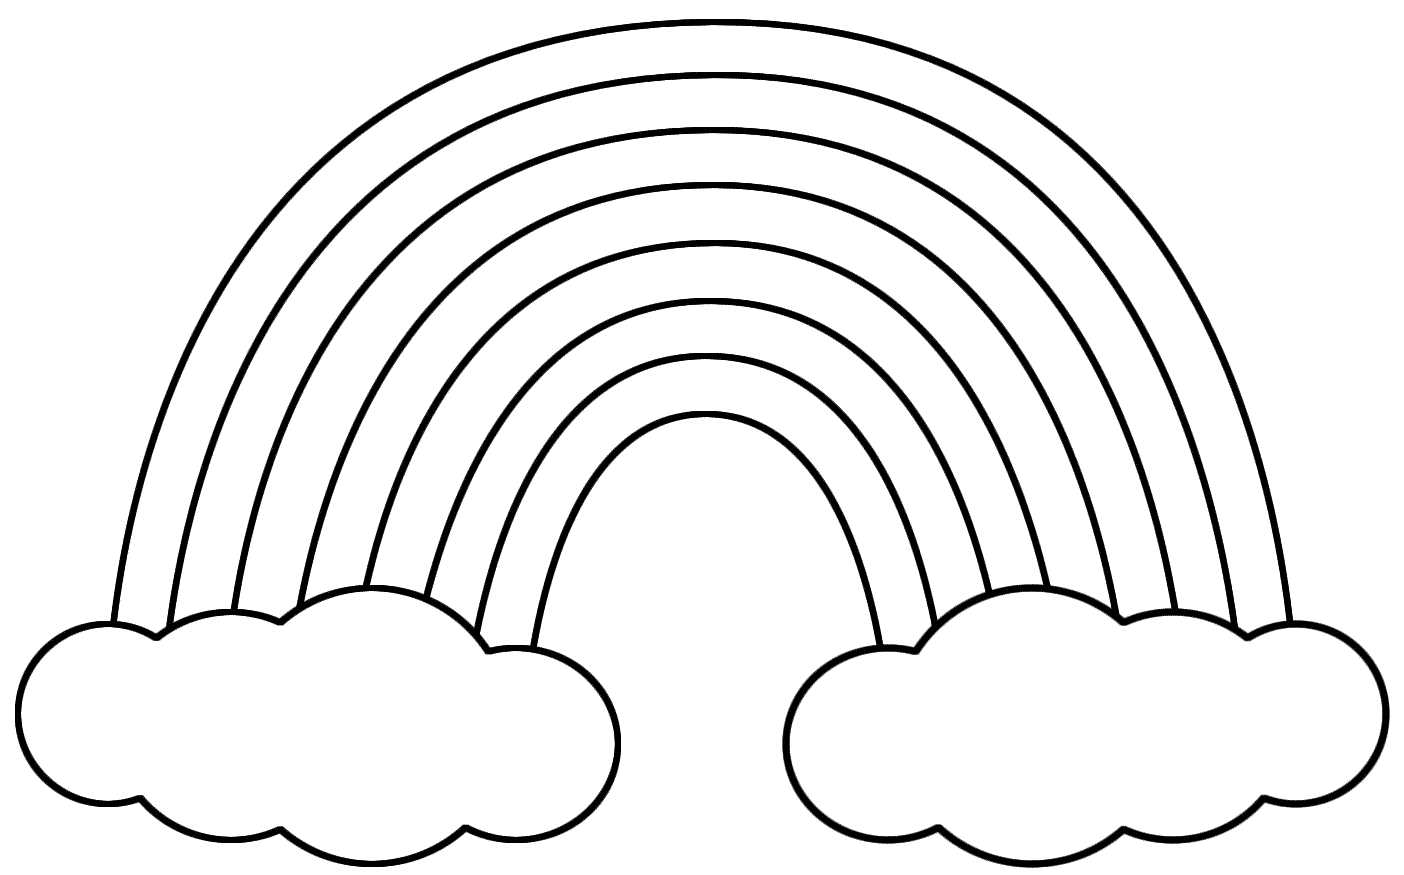 Rainbow Template With Clouds from clipart-library.com